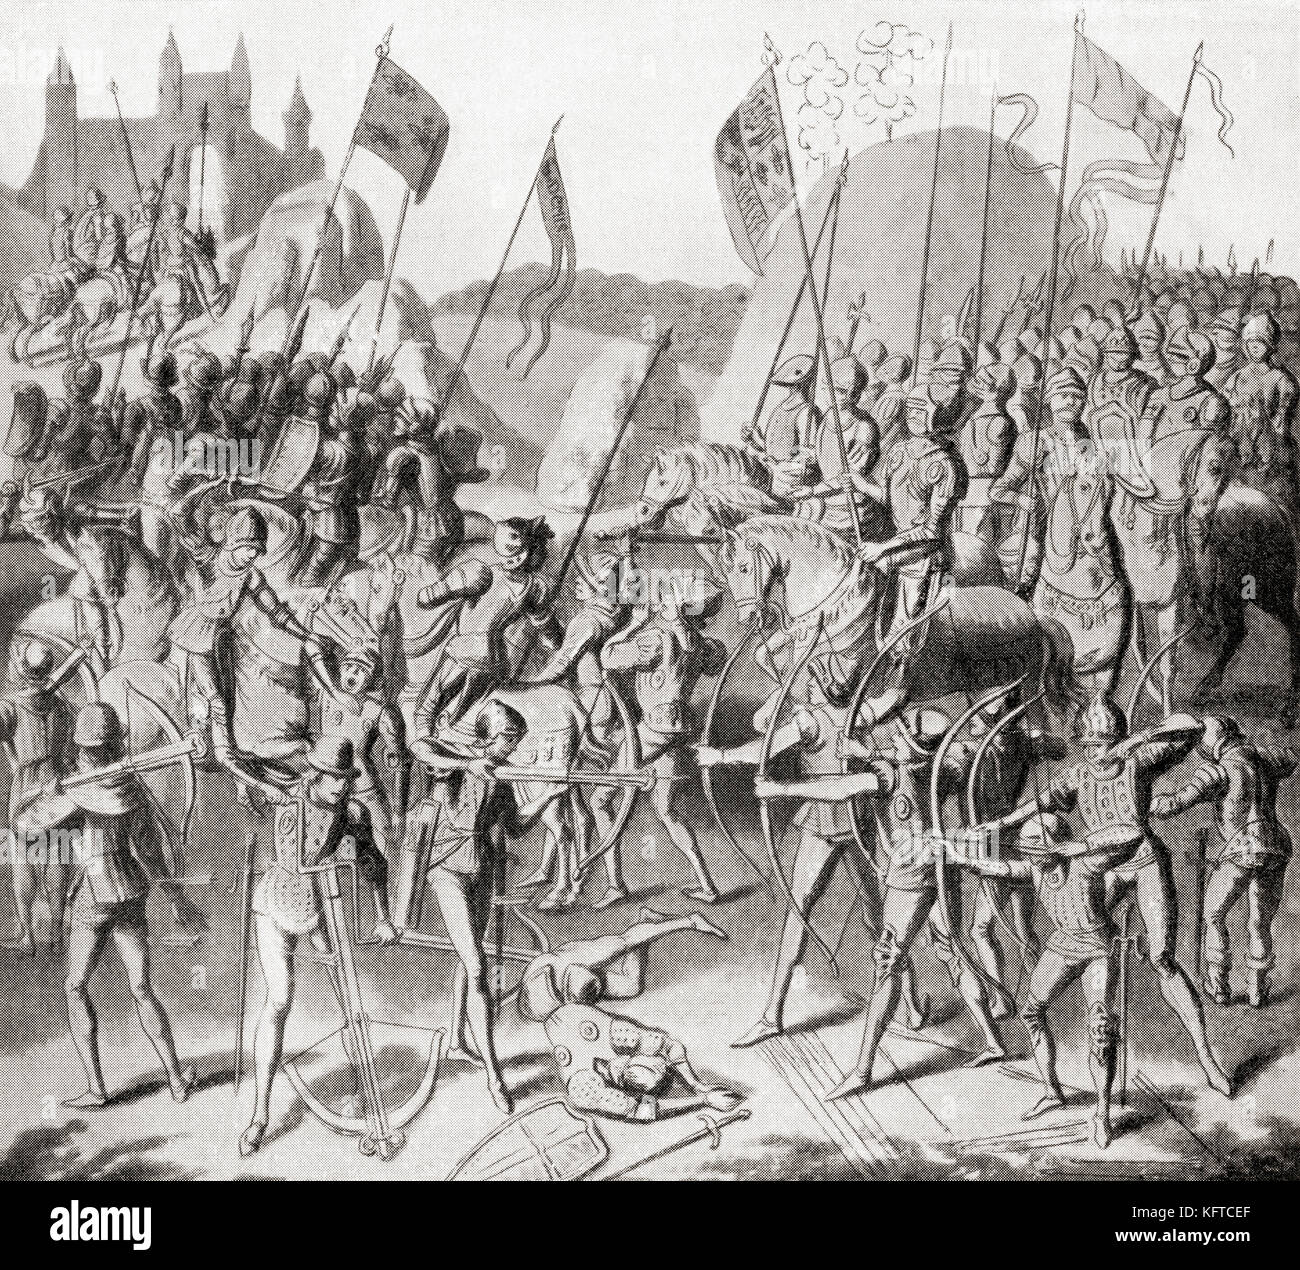 The Battle of Crécy, aka Battle of Cressy, 1346.  From Hutchinson's History of the Nations, published 1915. Stock Photo